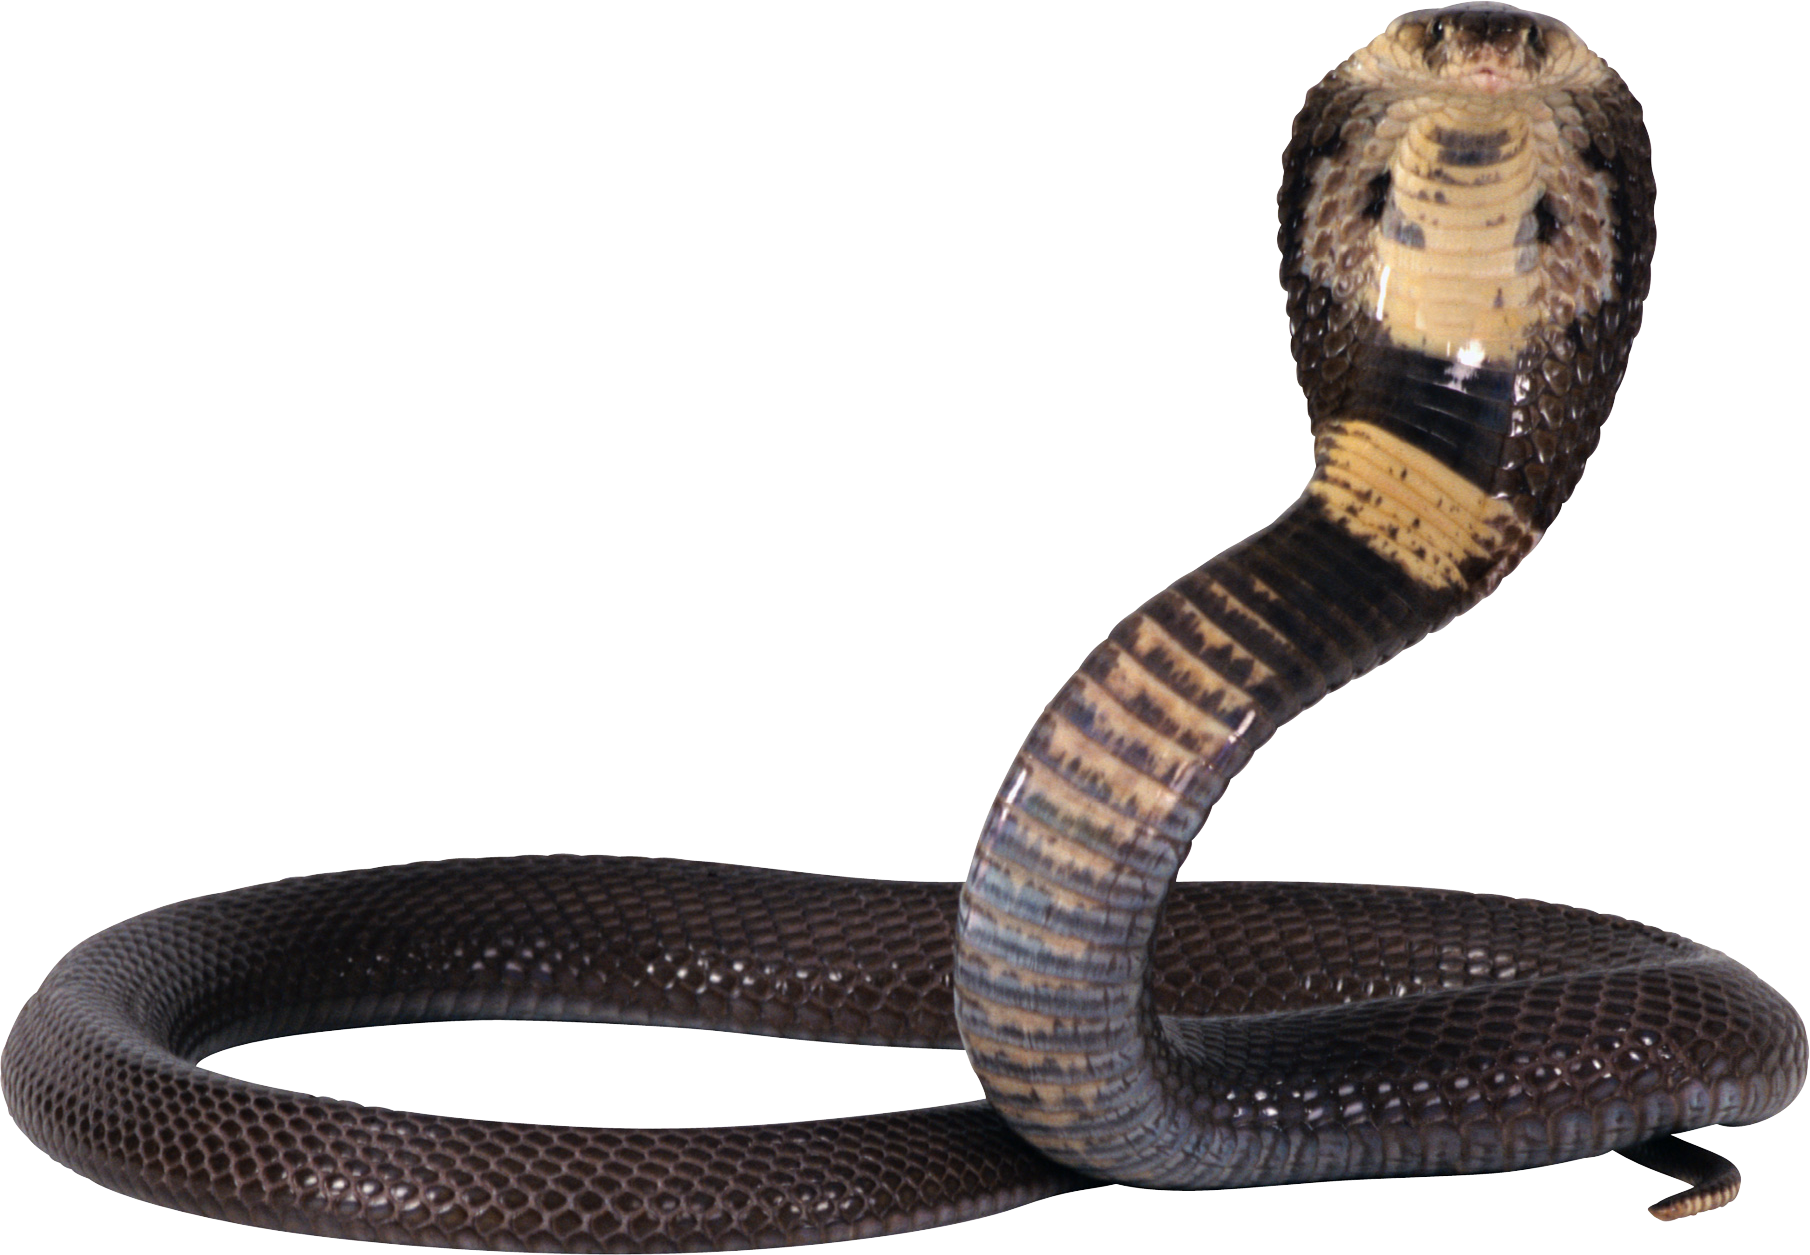 Cobra Snake PNG Picture